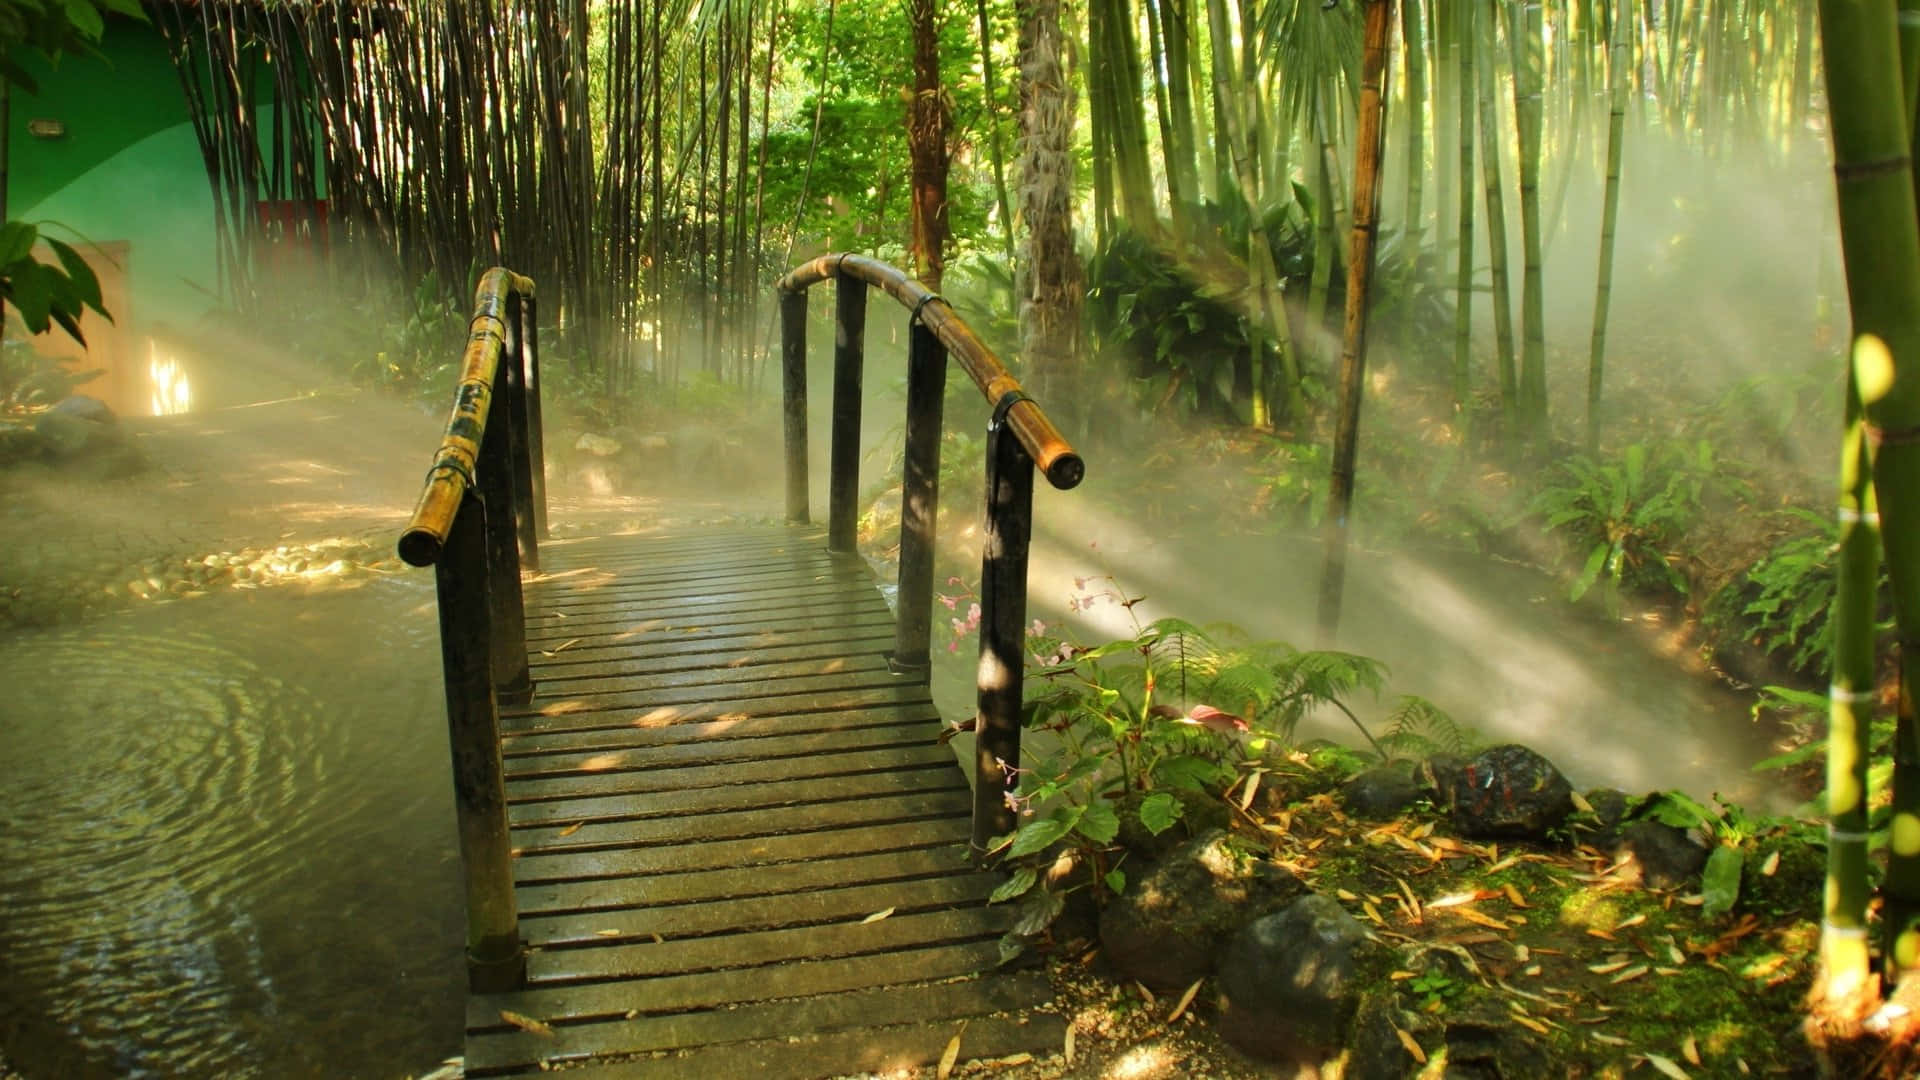 “explore The Mystical Bamboo Forest”